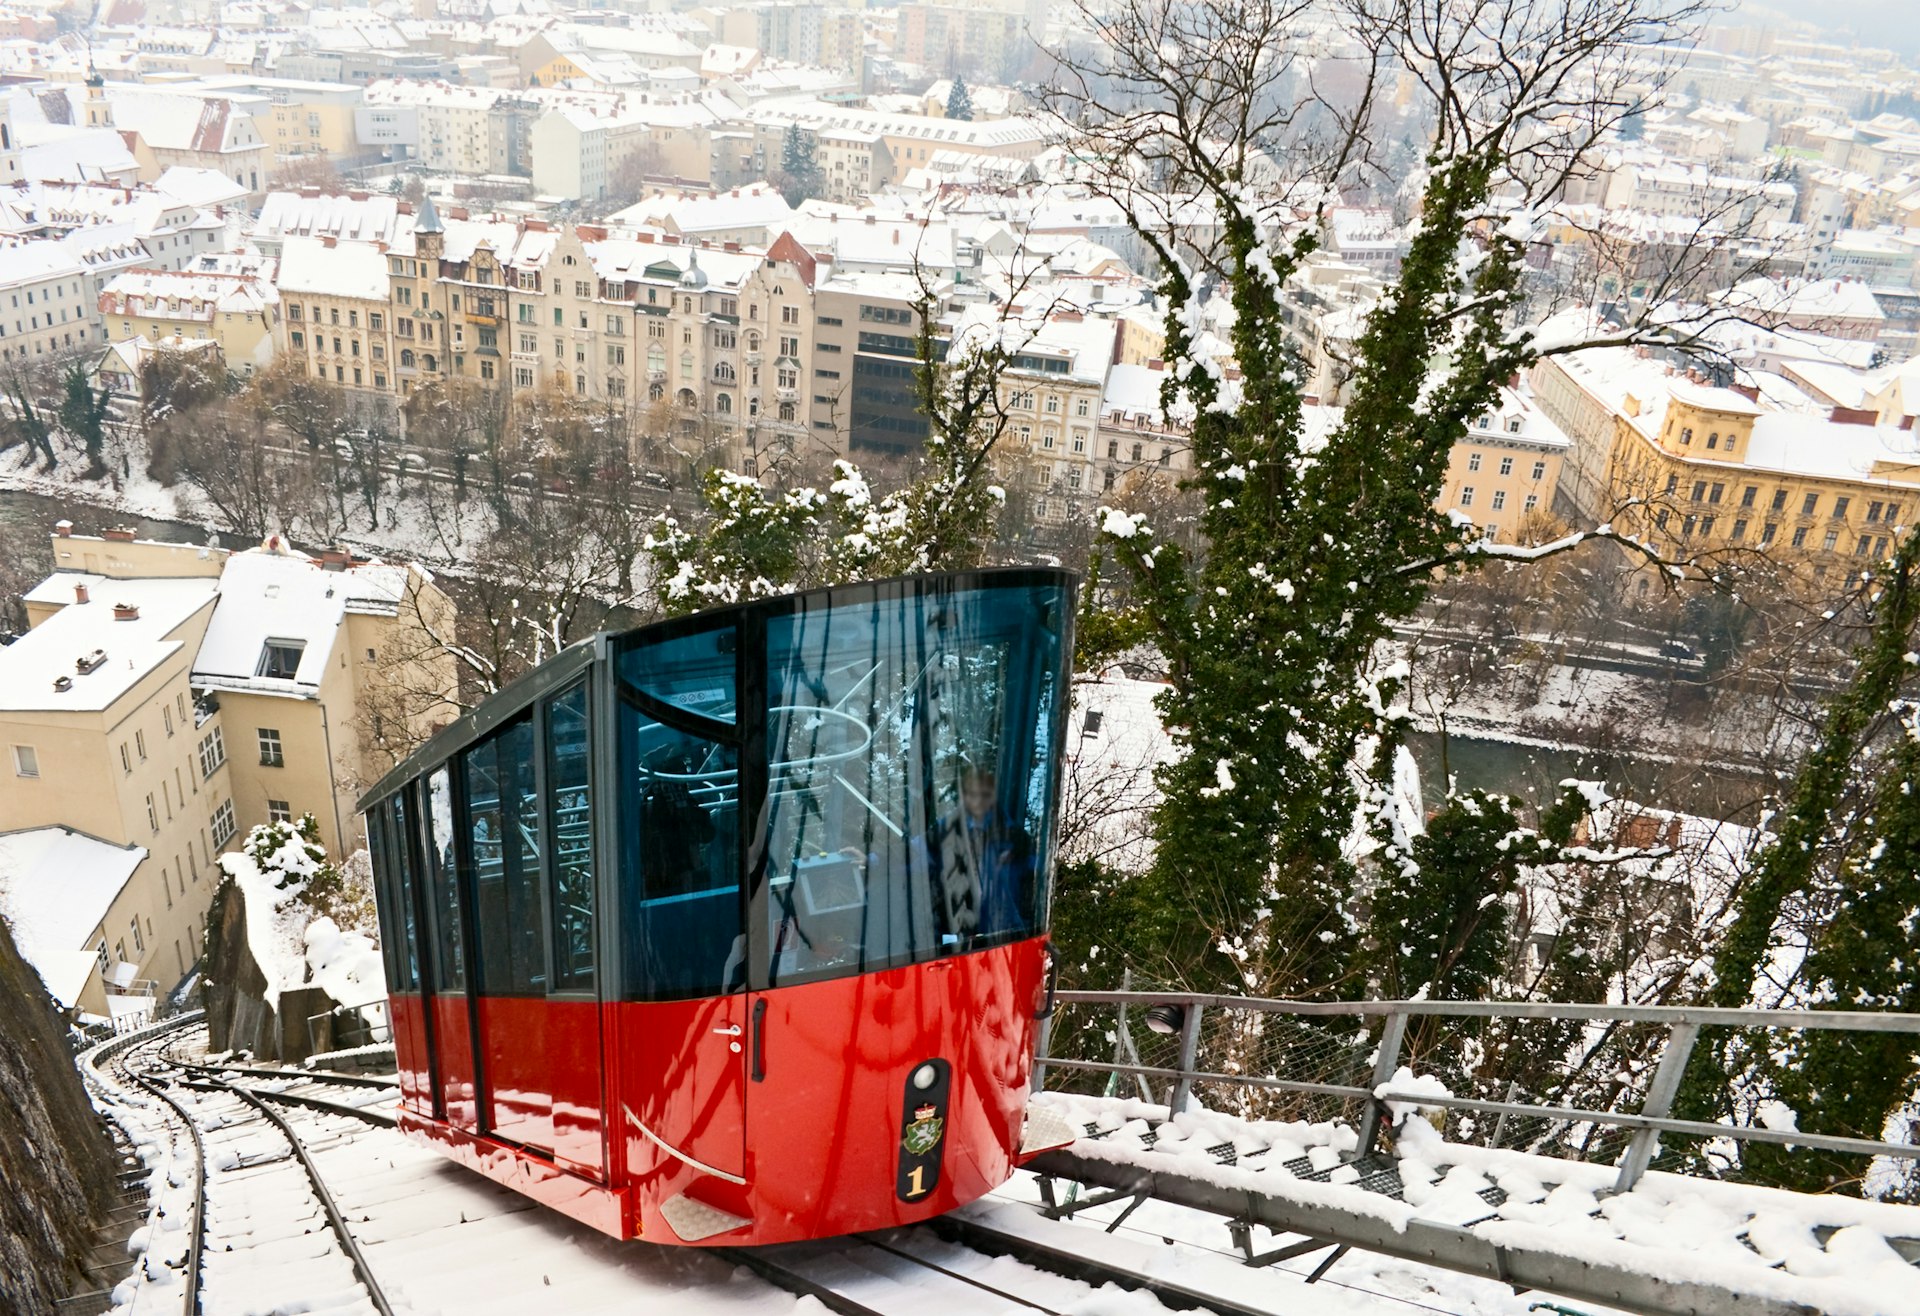 A red car on a funicular railway climbs up a steep, snowy track with the city of Graz, Austria, in the background.